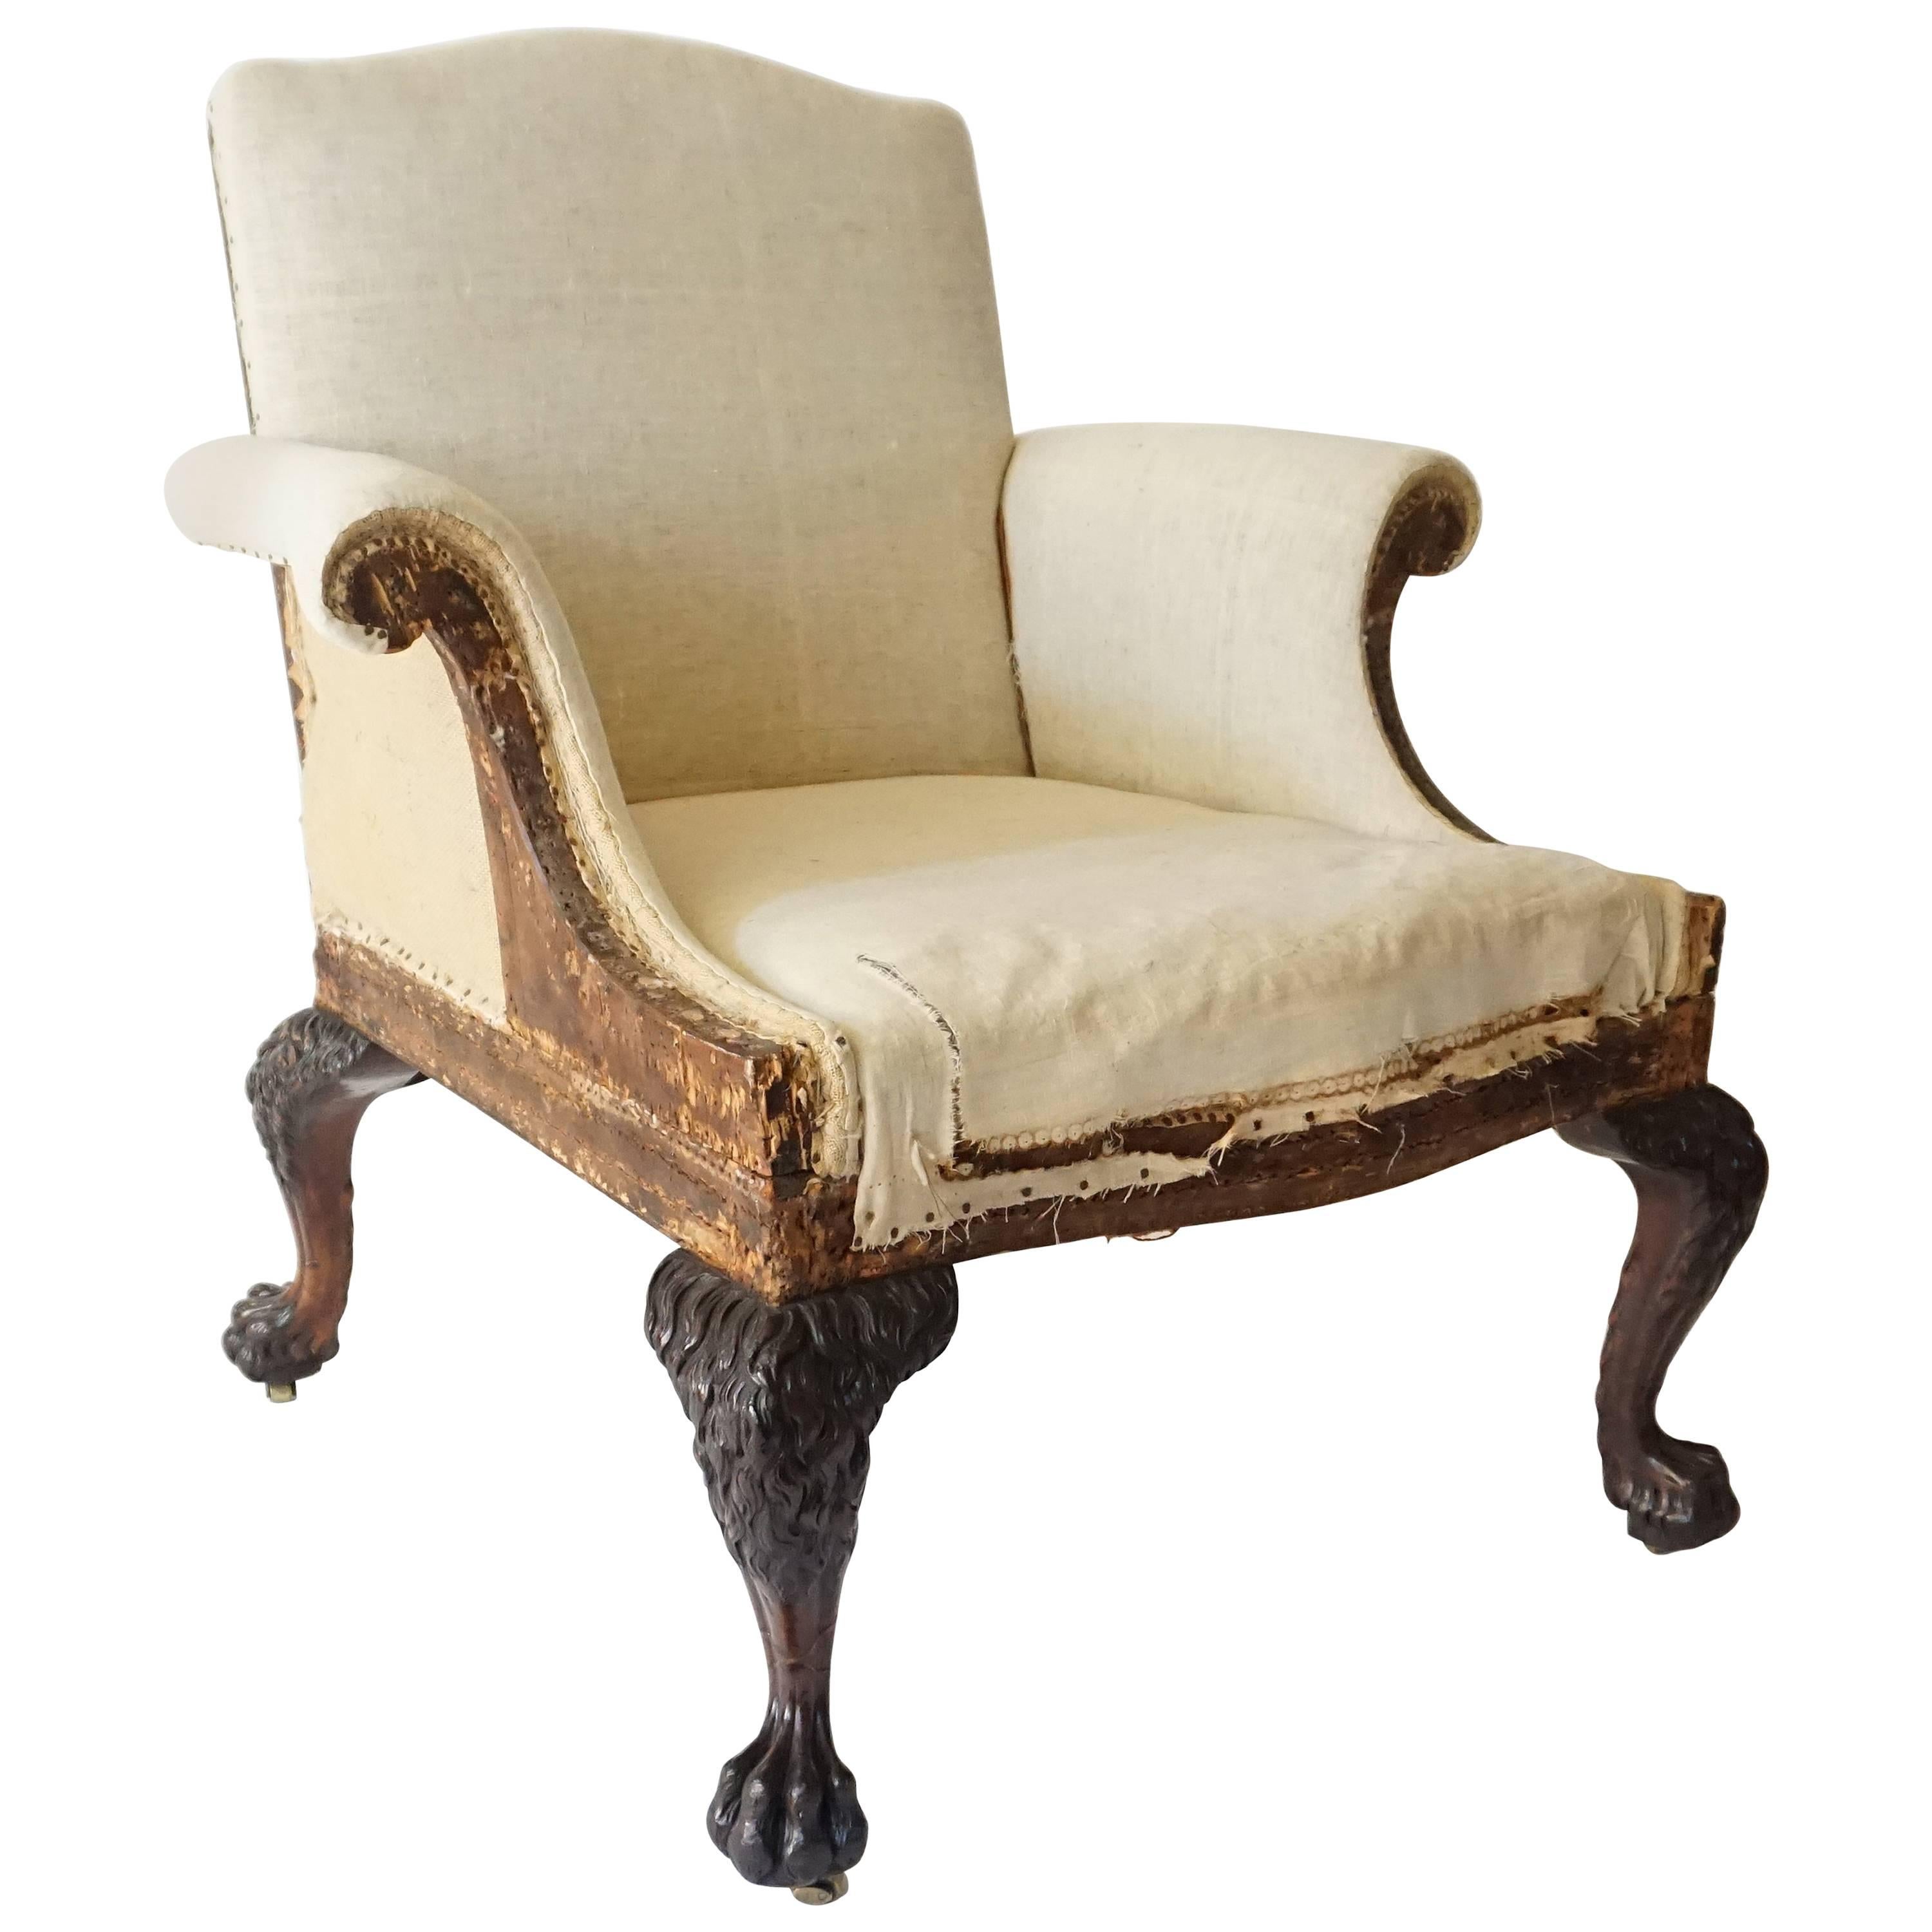 George II Style Armchair by Lenygon & Company